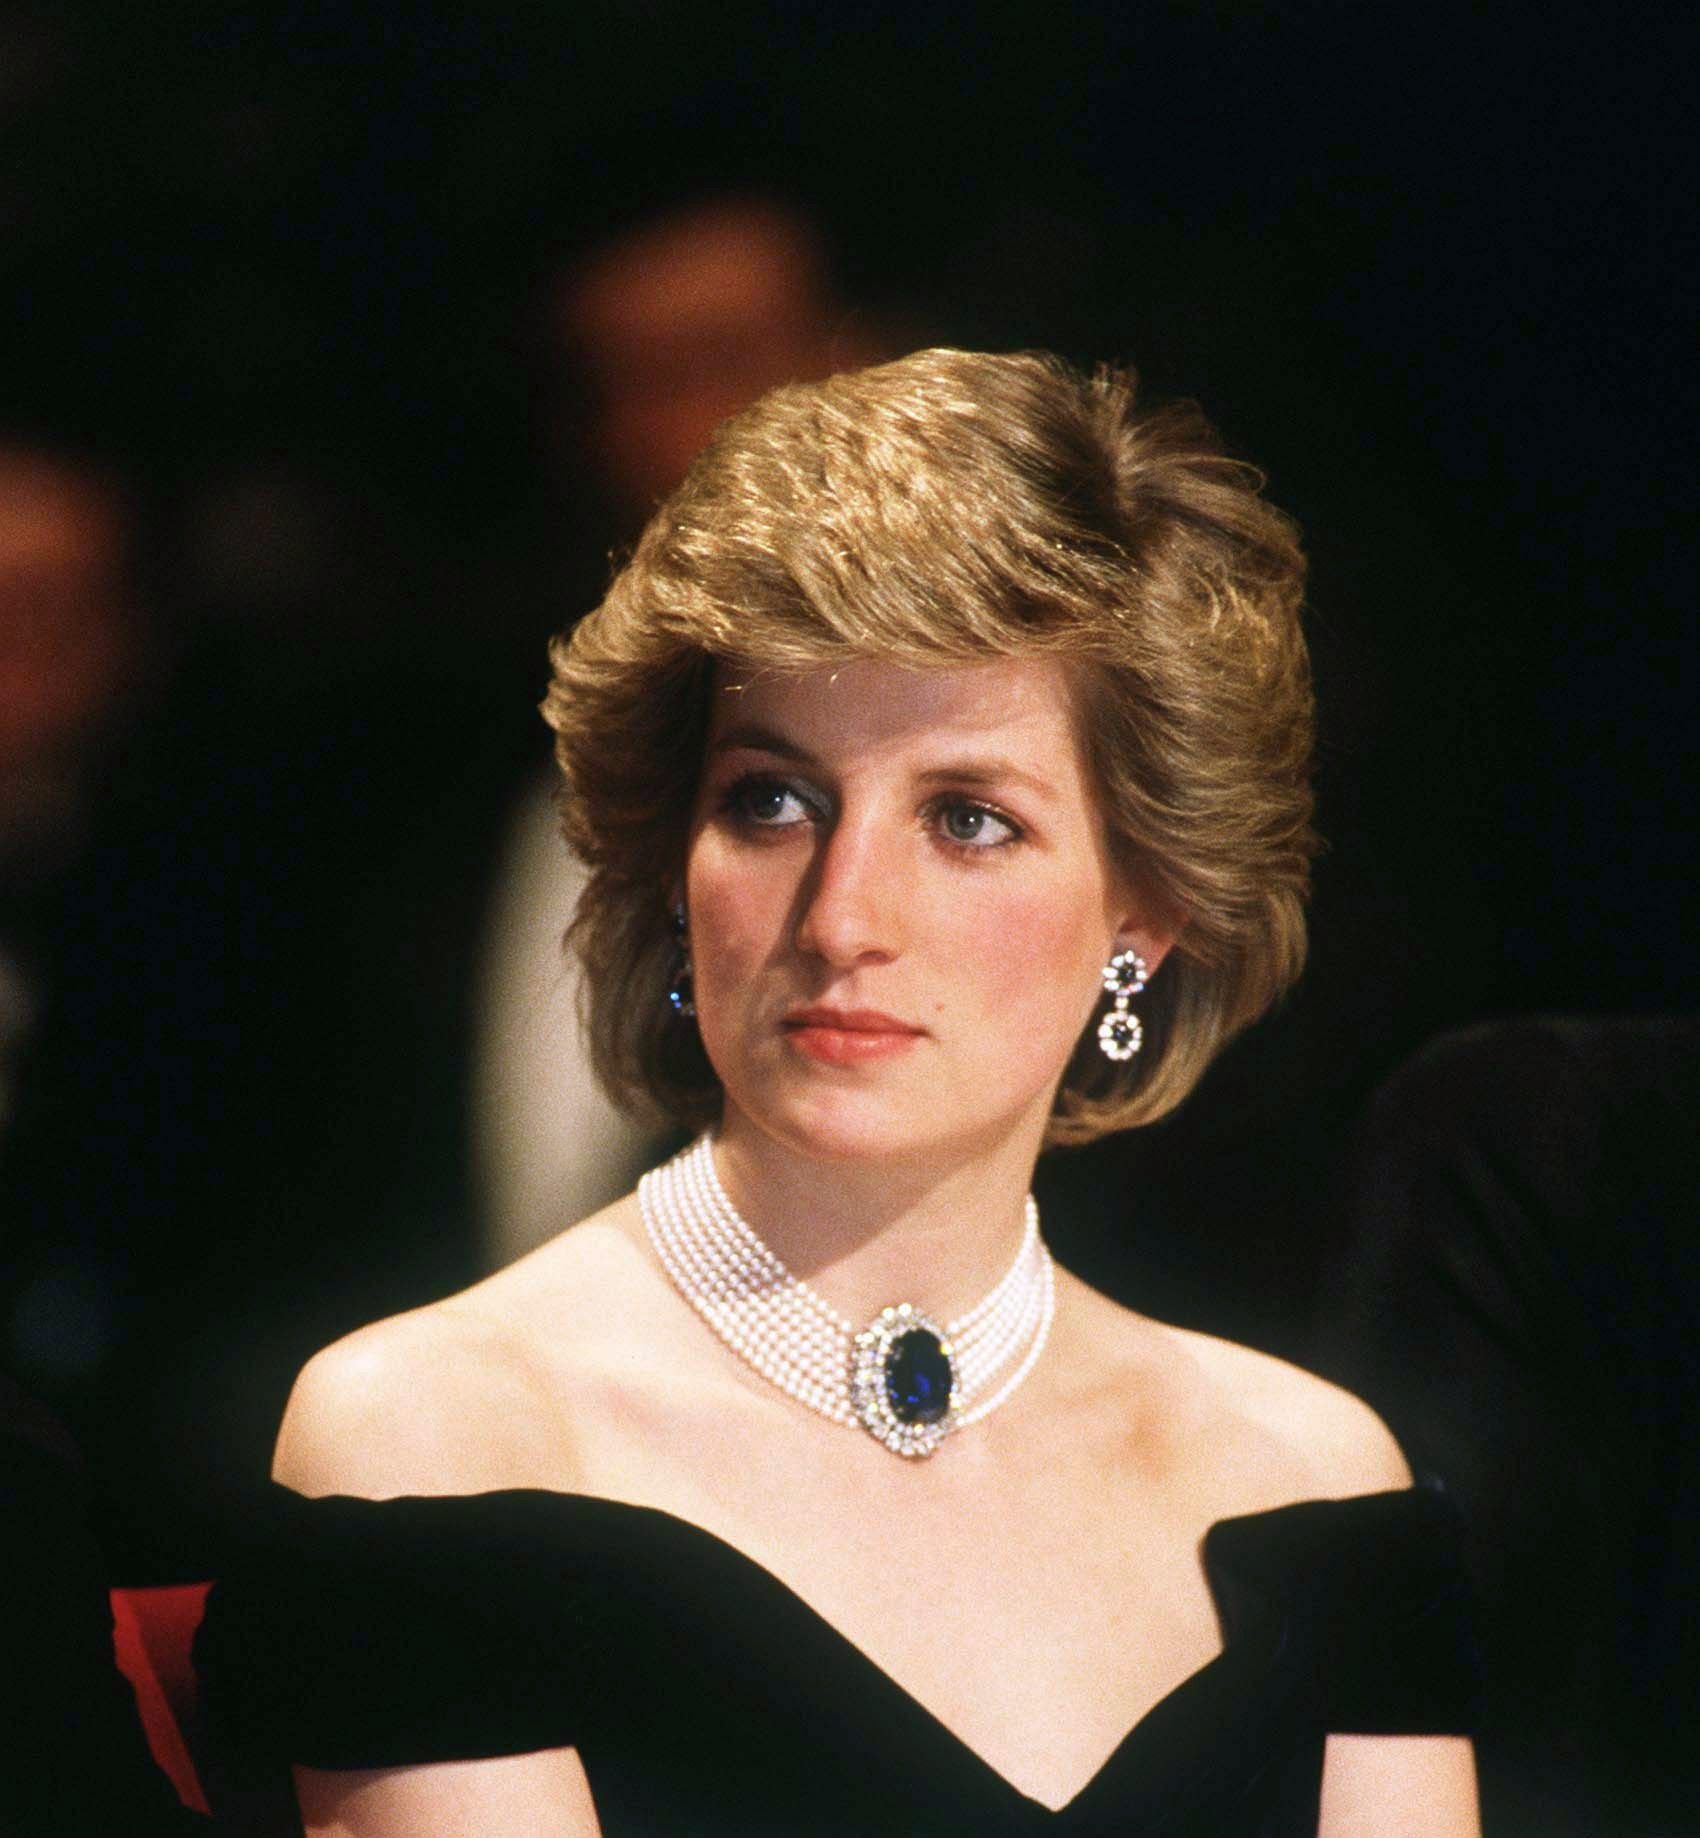 Princess Diana at a state banquet on April 16, 1986 | Photo: Getty Images